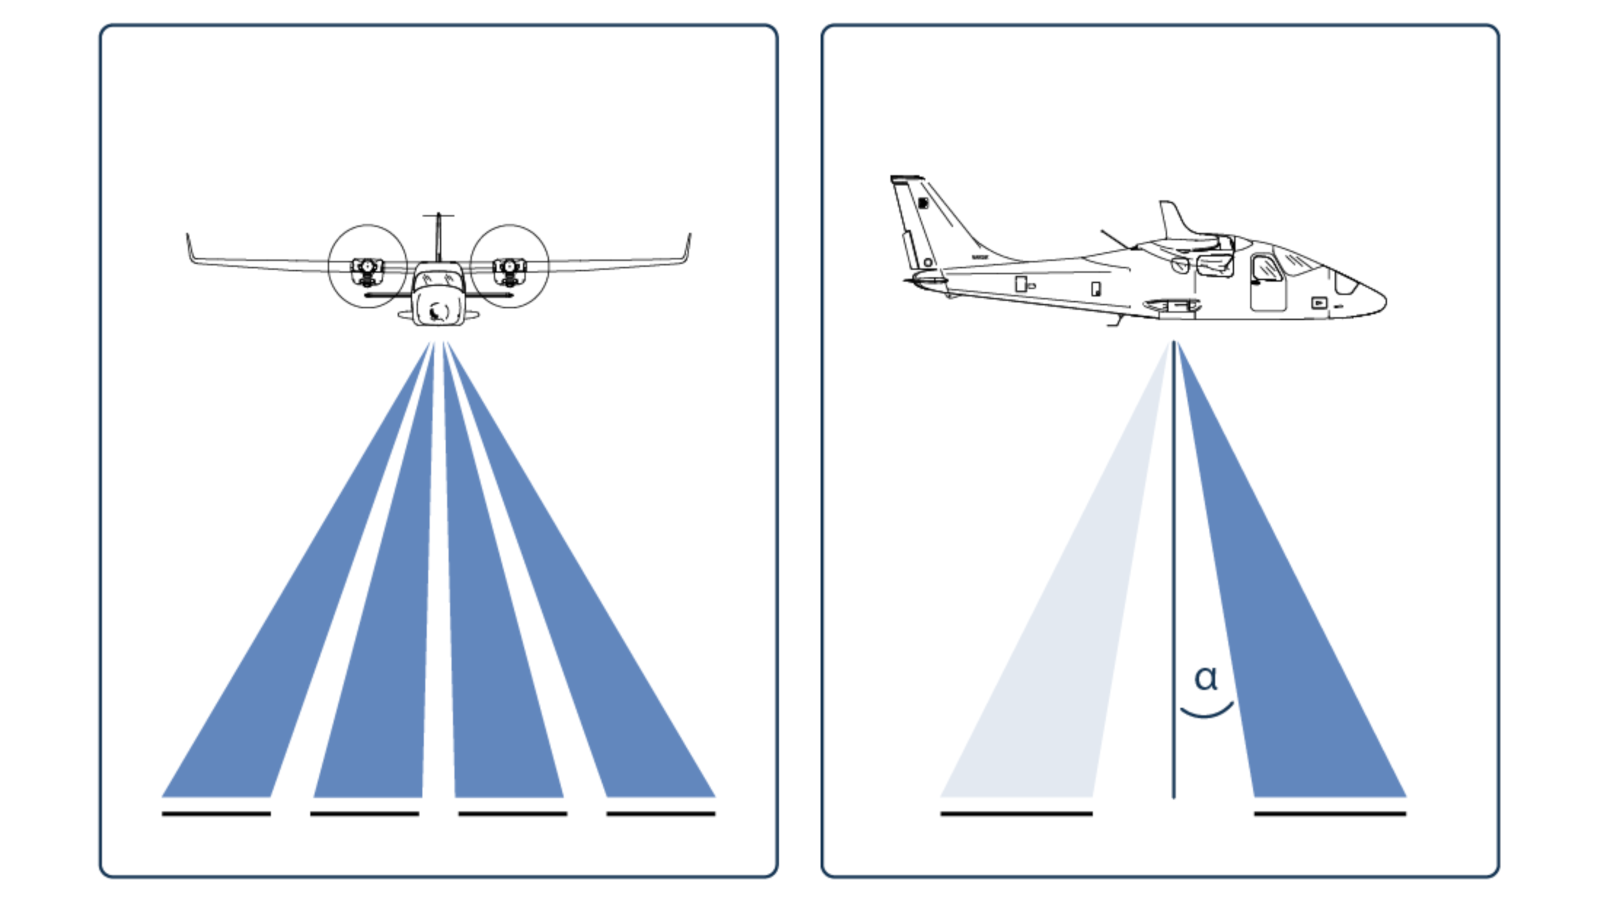 Schematic representation of the arrangement of the HiDef cameras on the aircraft.